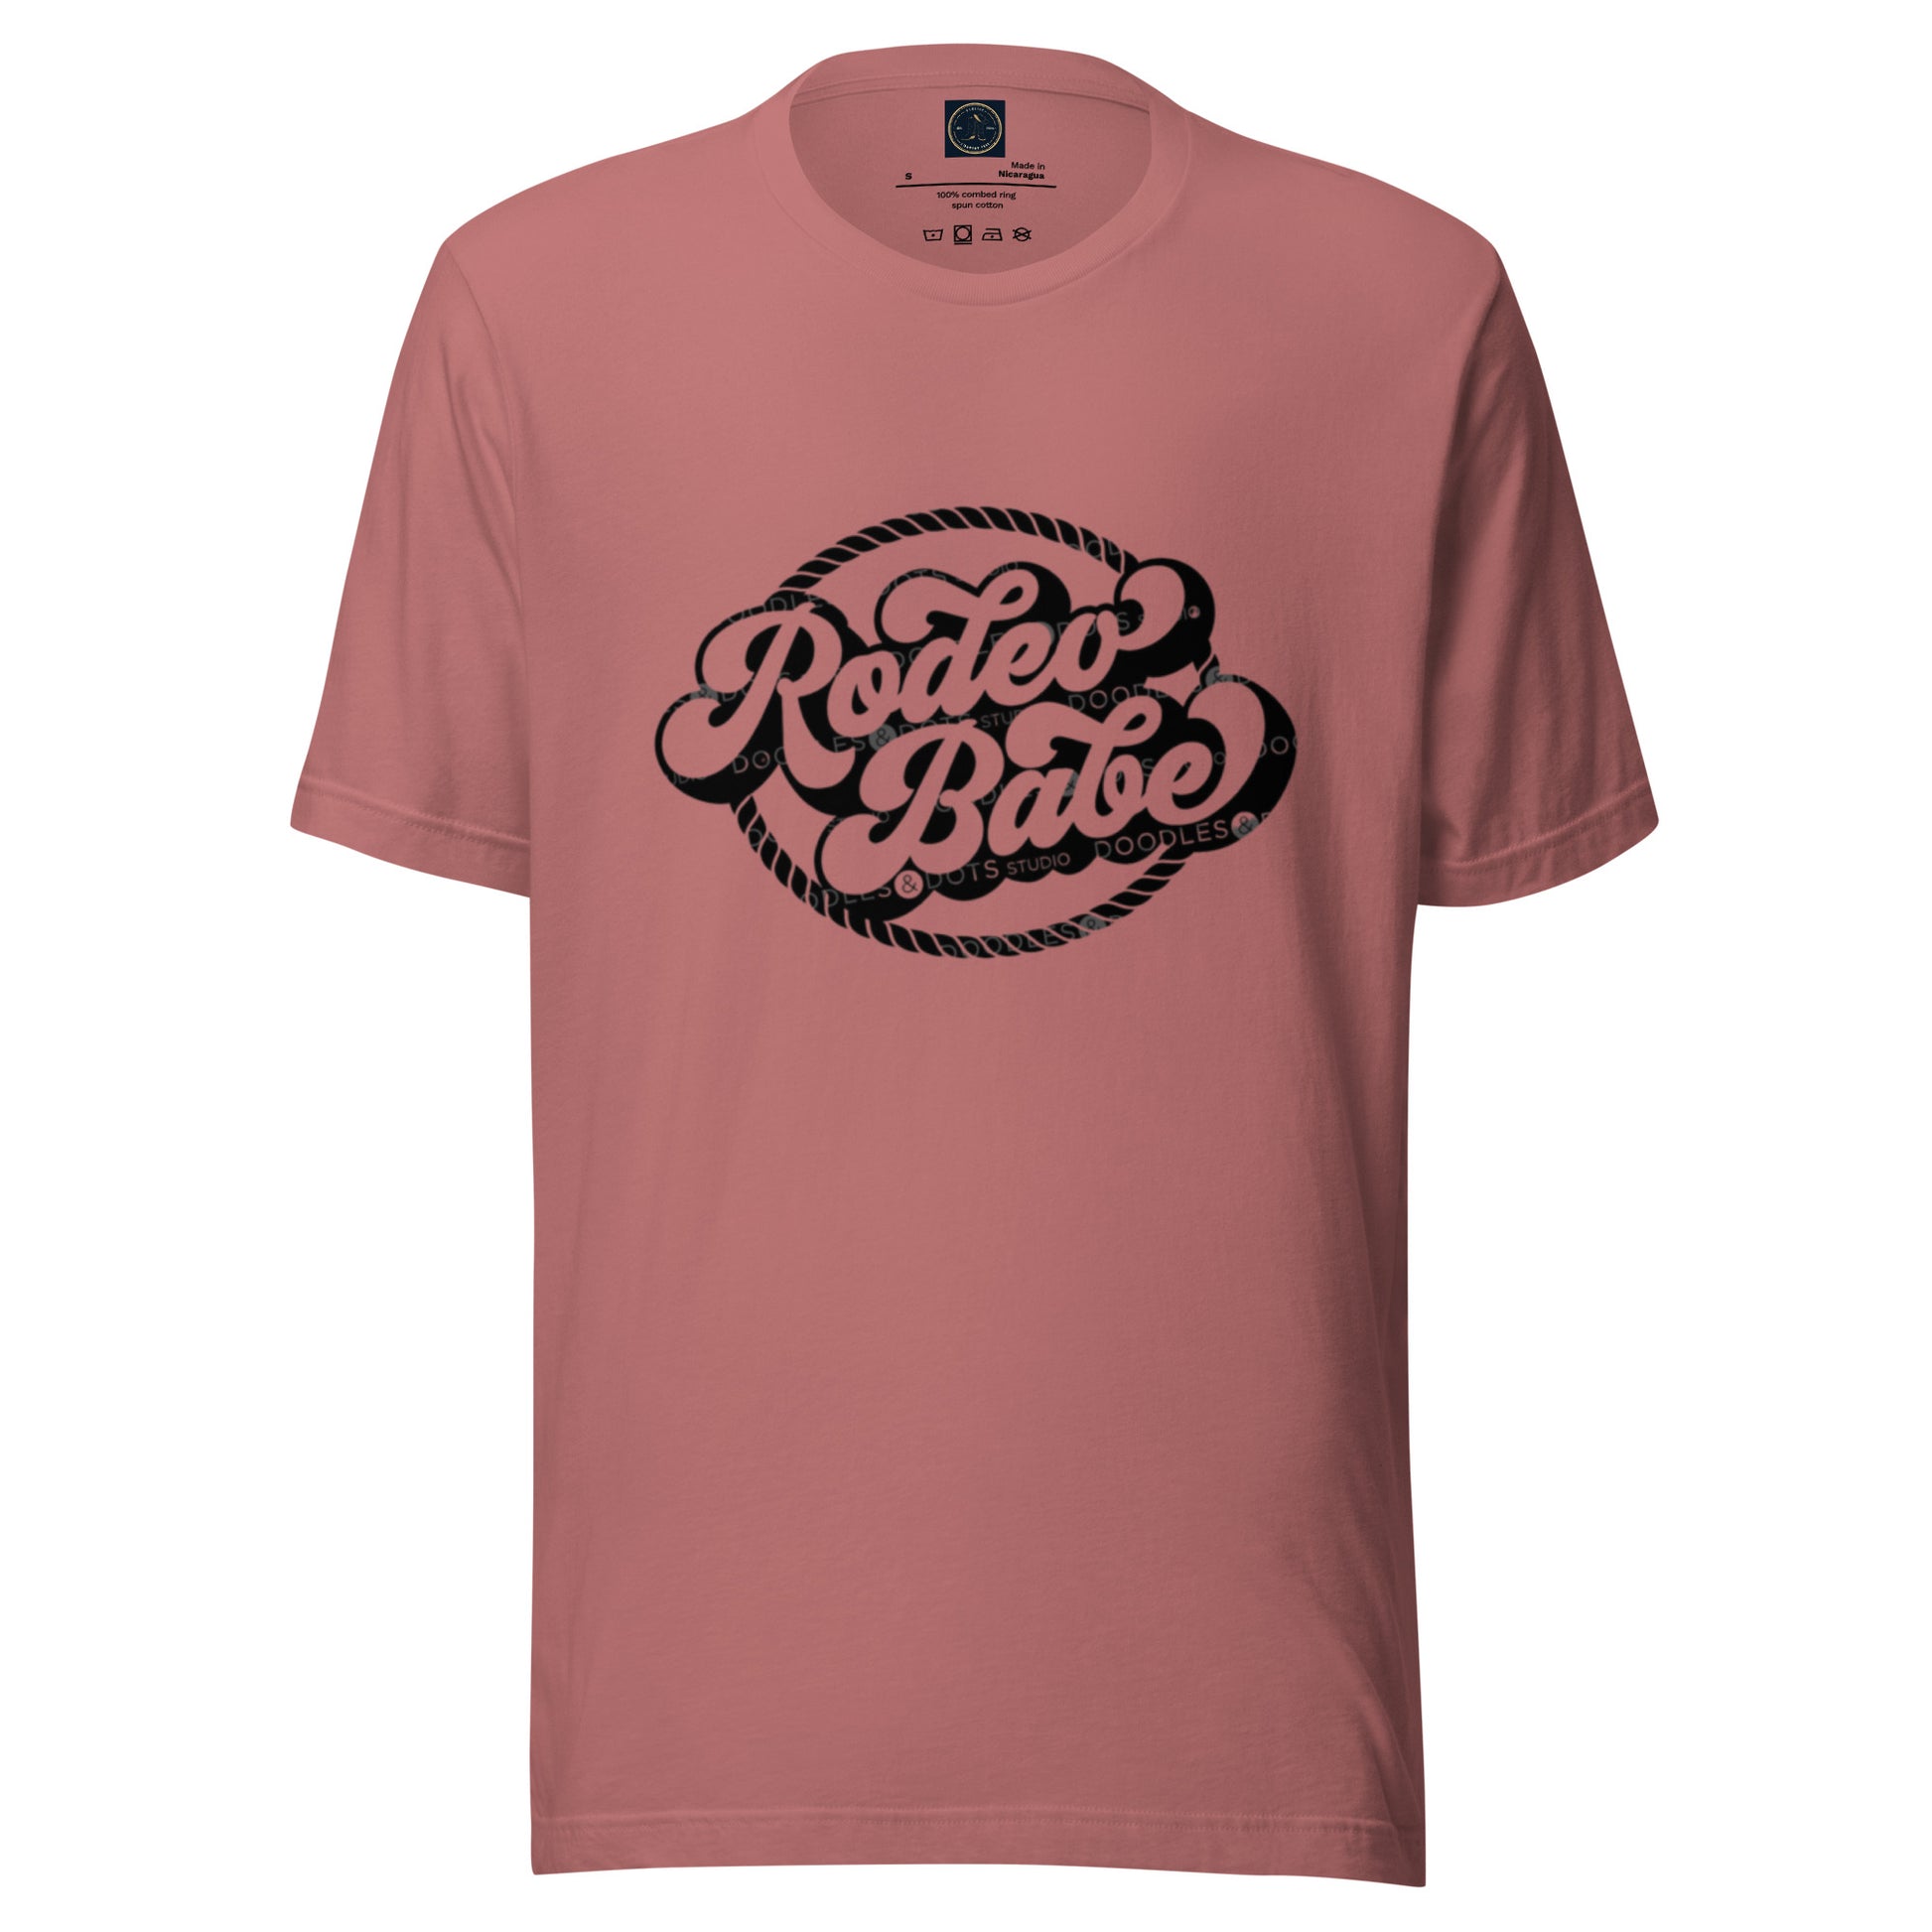 Rodeo Babe - Classic Country Tees